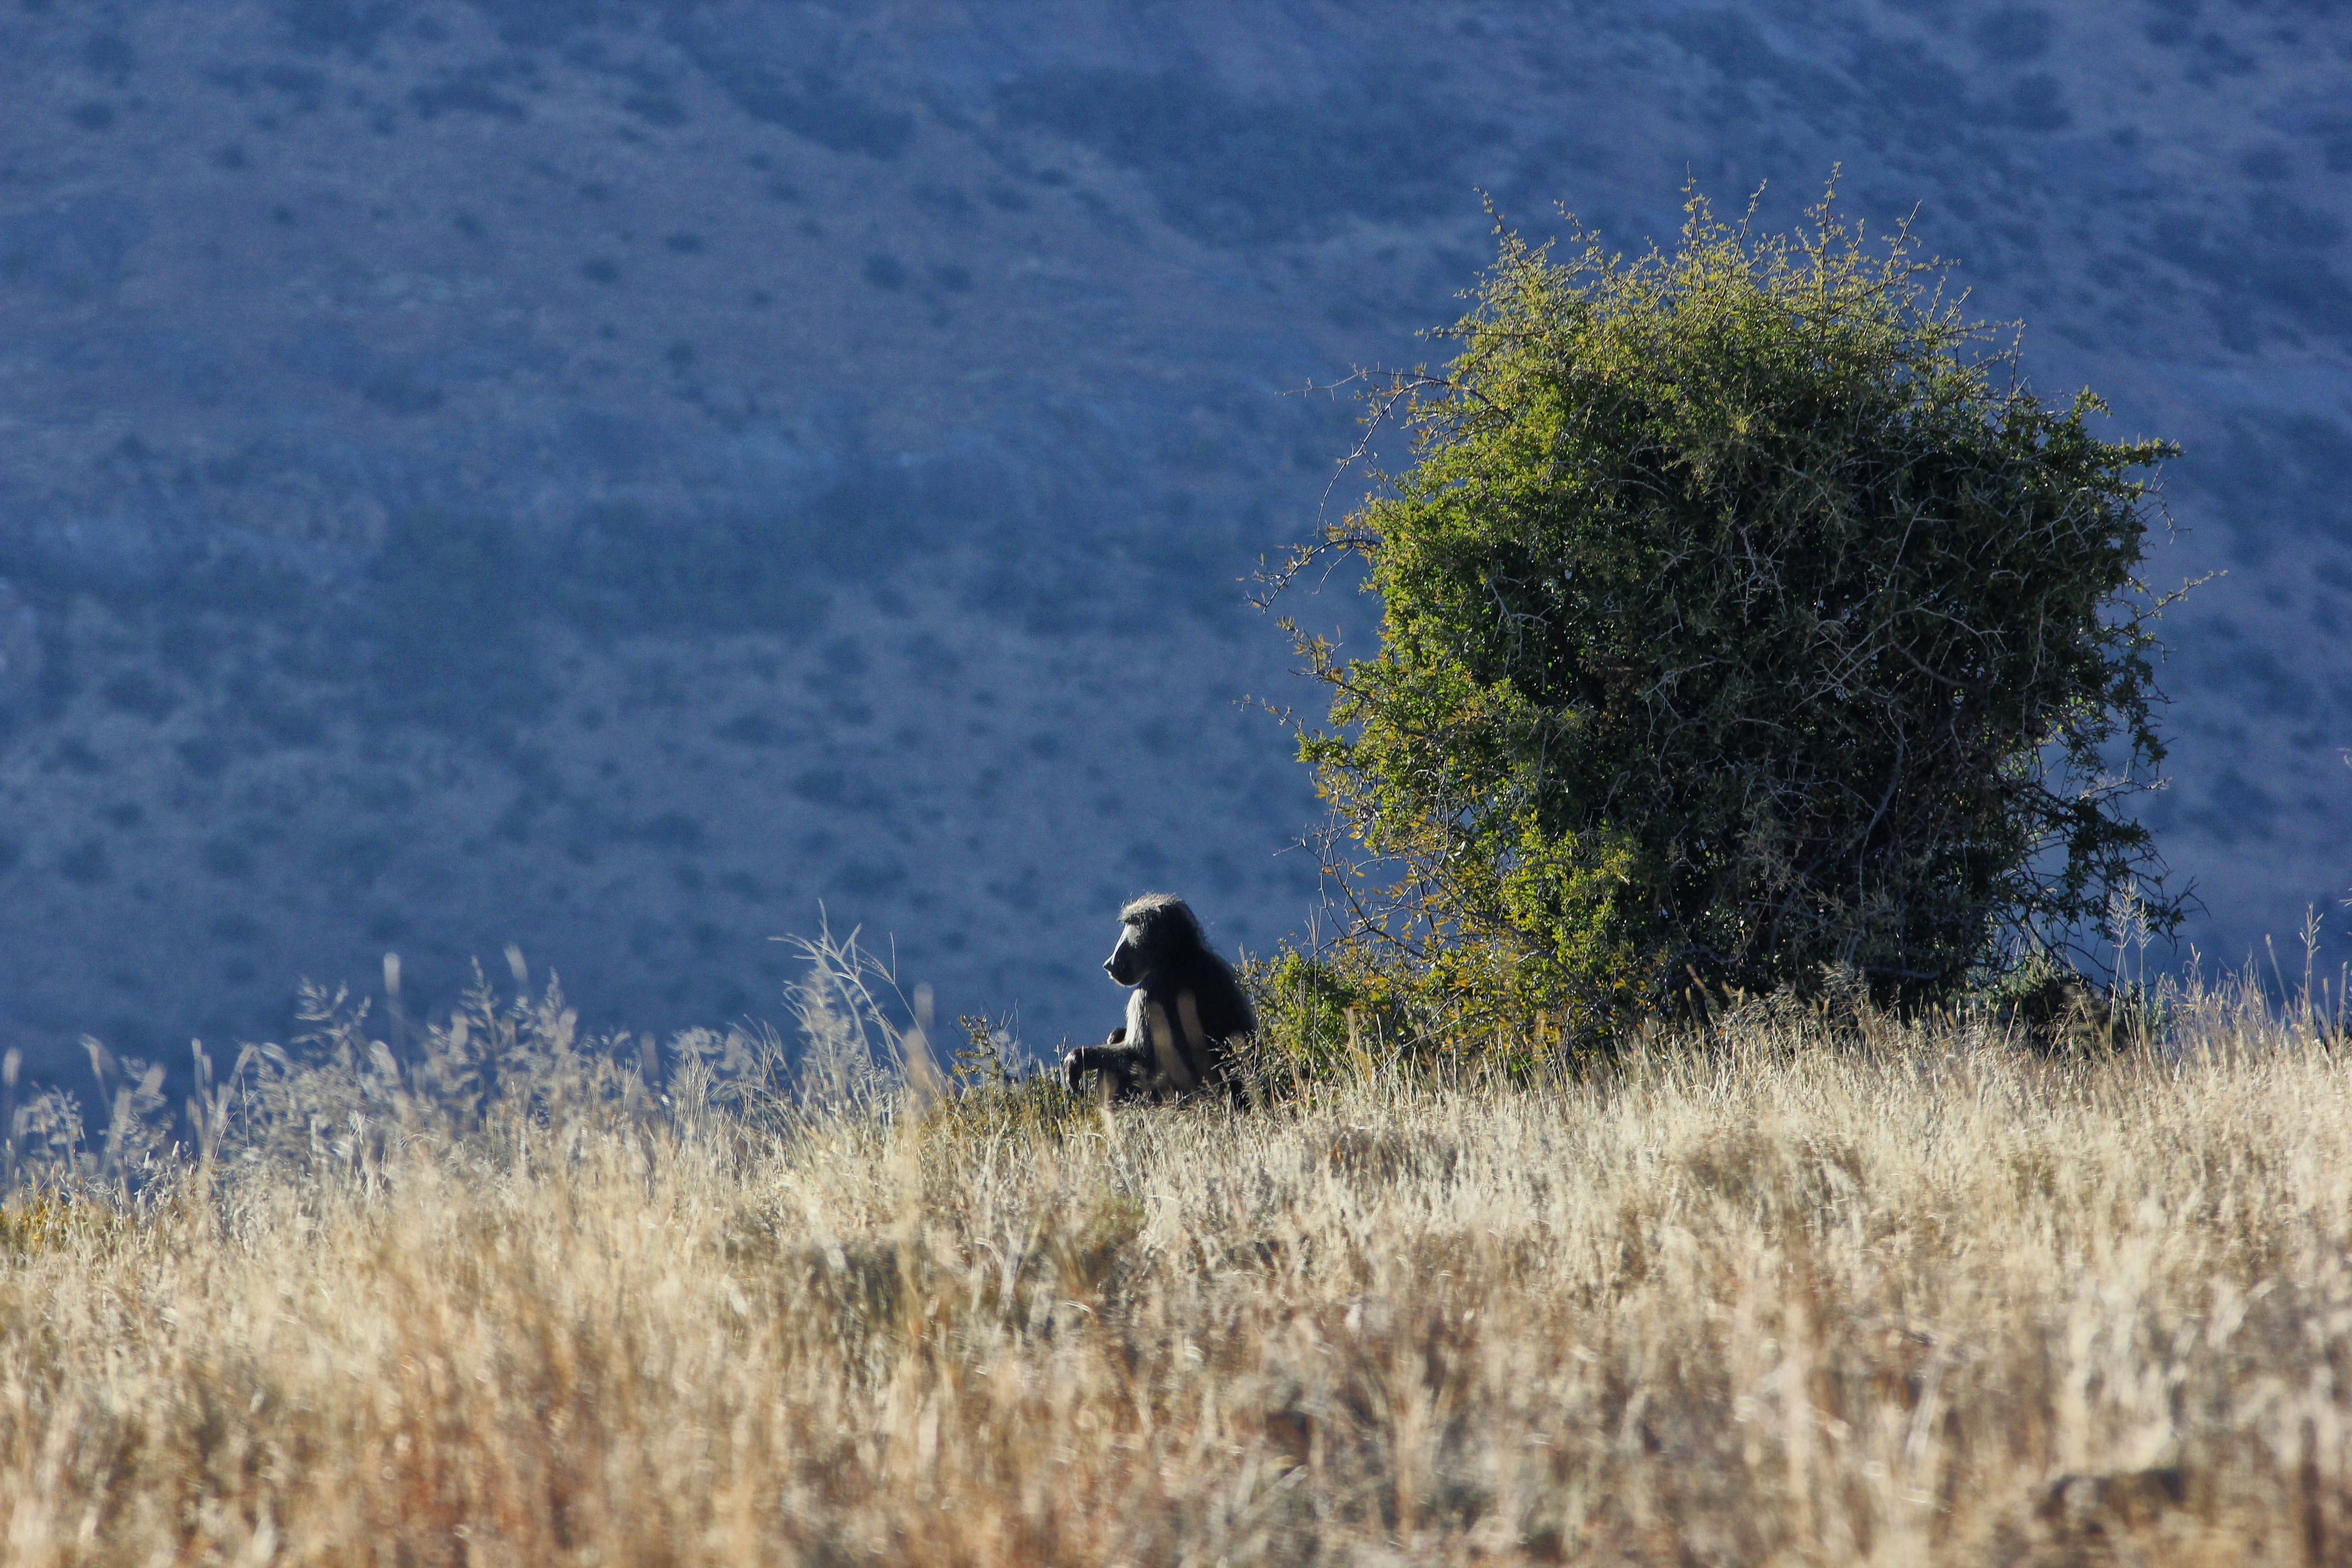 A baboon calmly surveying his mountain kingdom, backlit by the early morning sun.